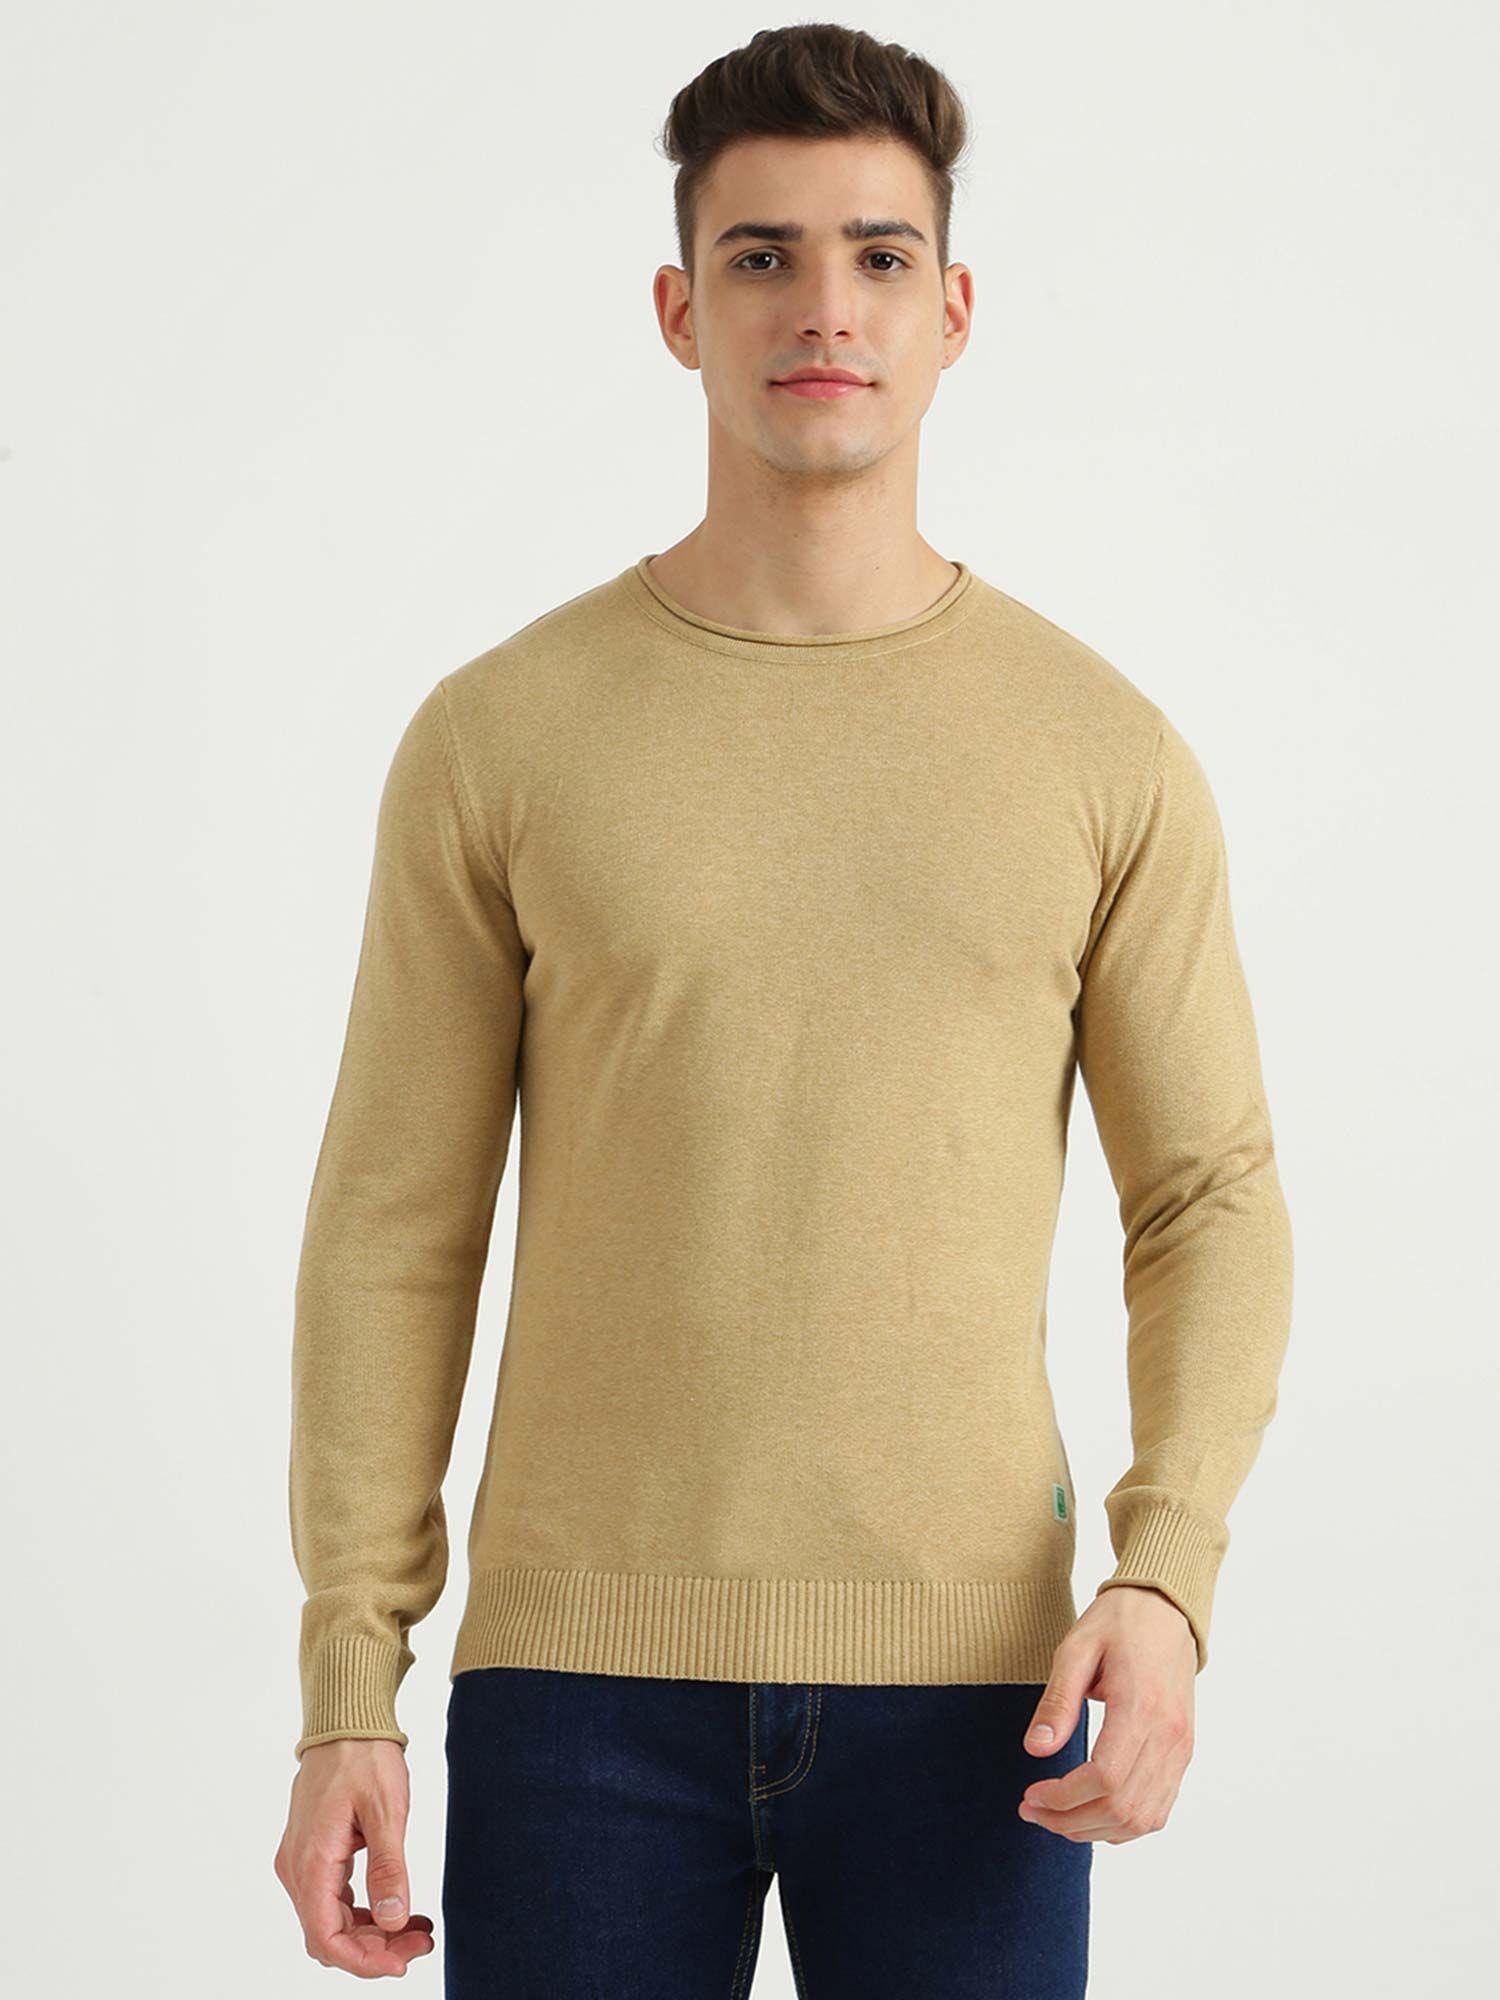 mens-long-sleeve-solid-sweater